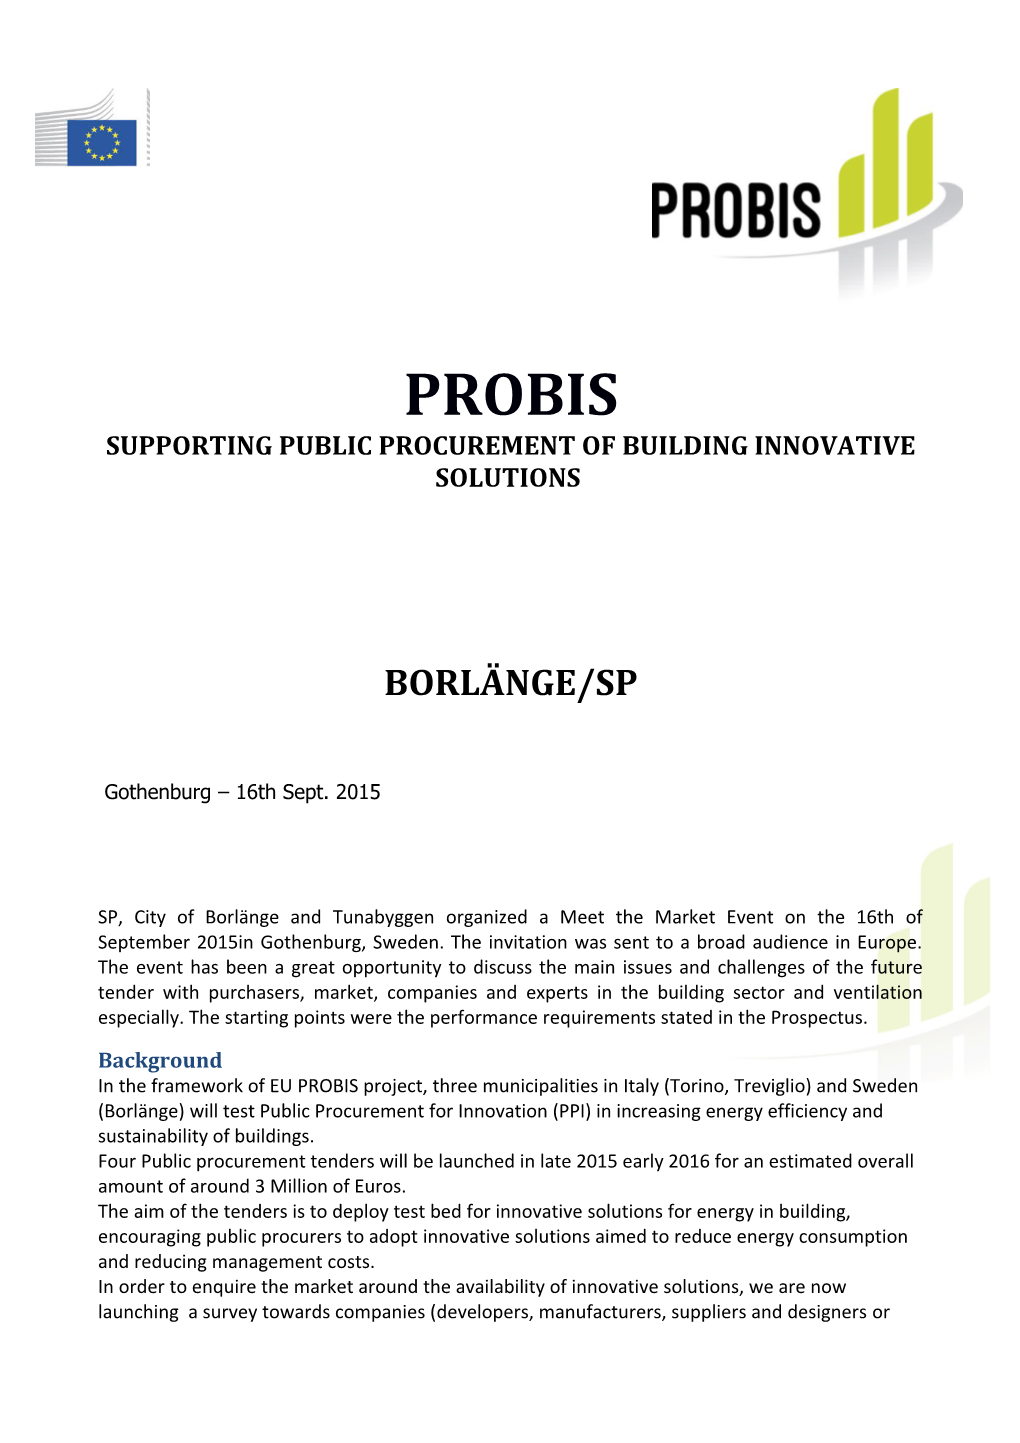 Supporting Public Procurement of Building Innovative Solutions